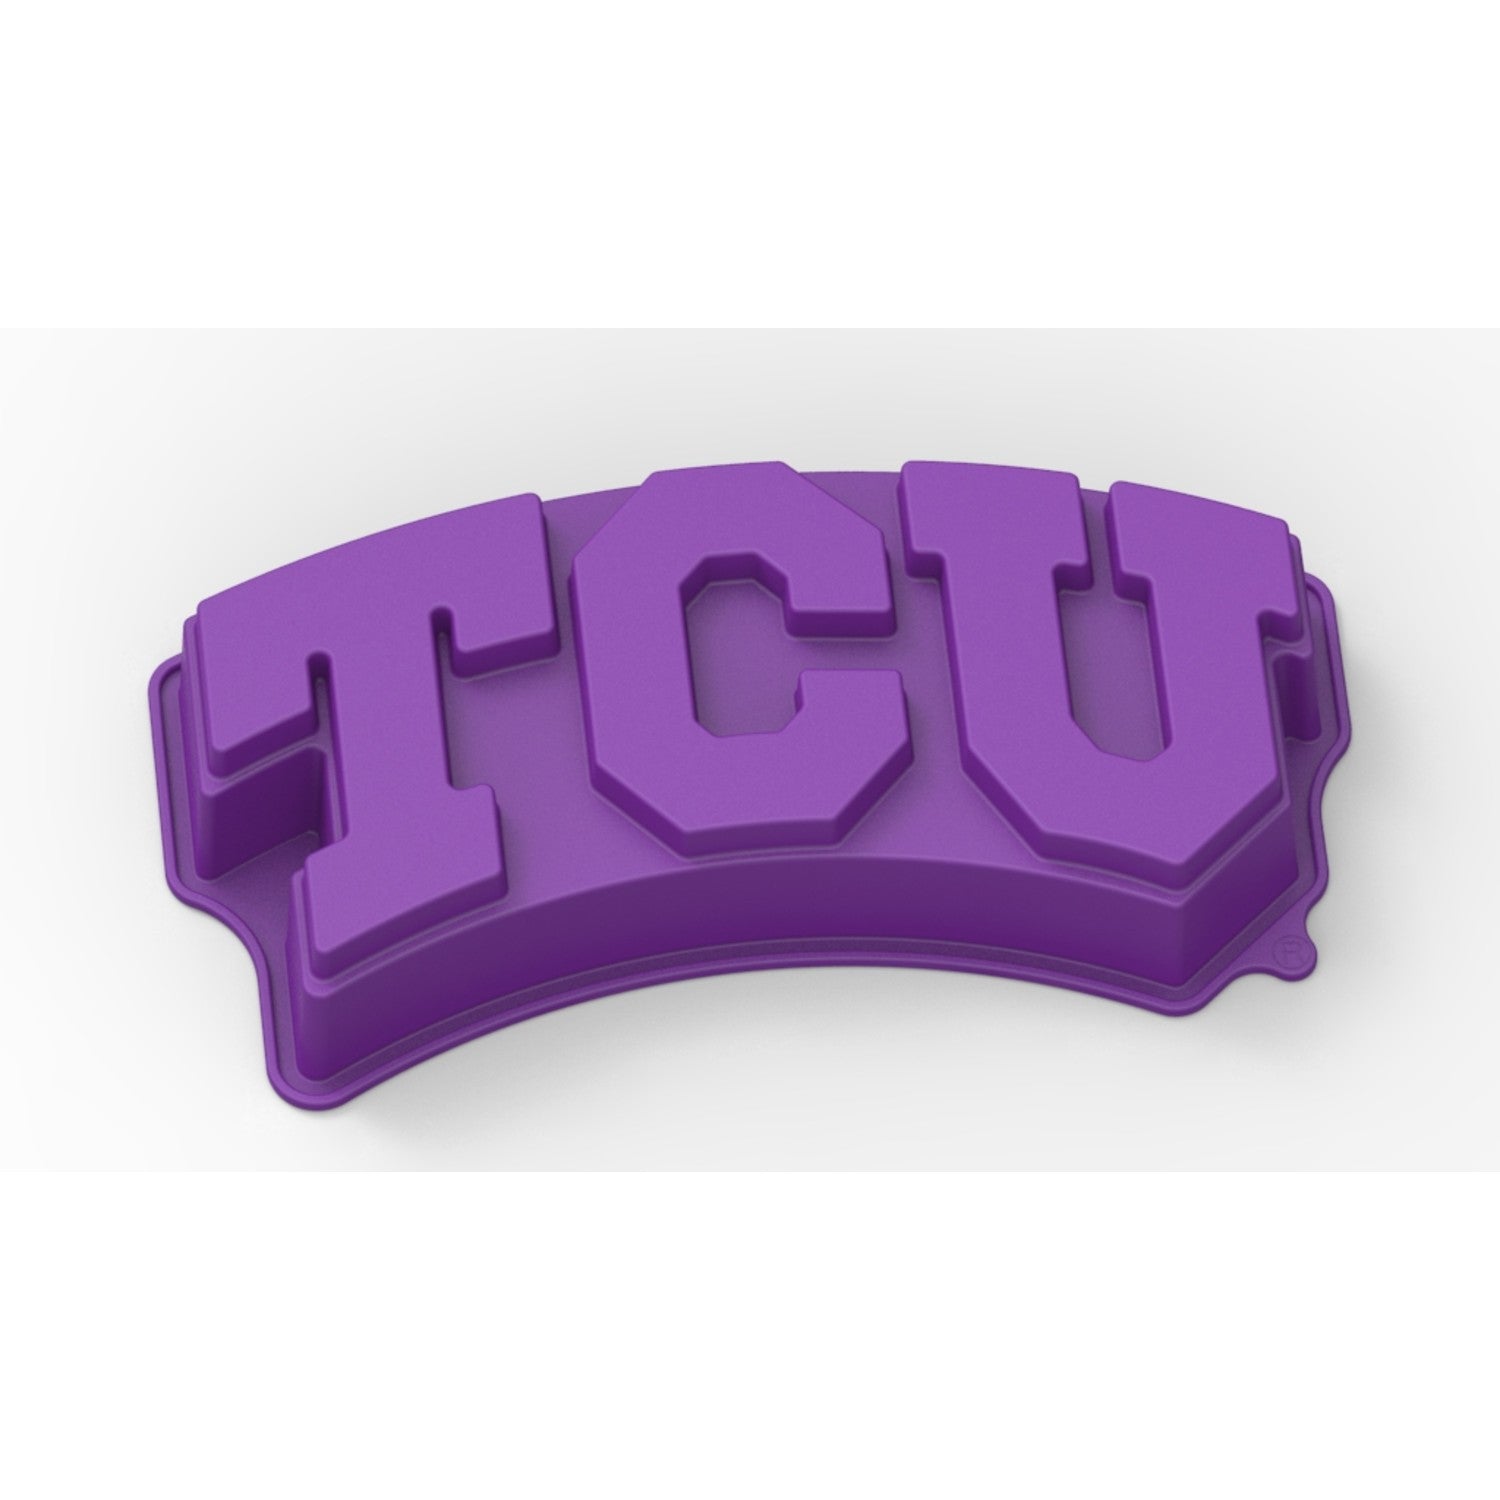 TCU Horned Frogs Cake Pan | MasterPieces – MasterPieces Puzzle Company INC